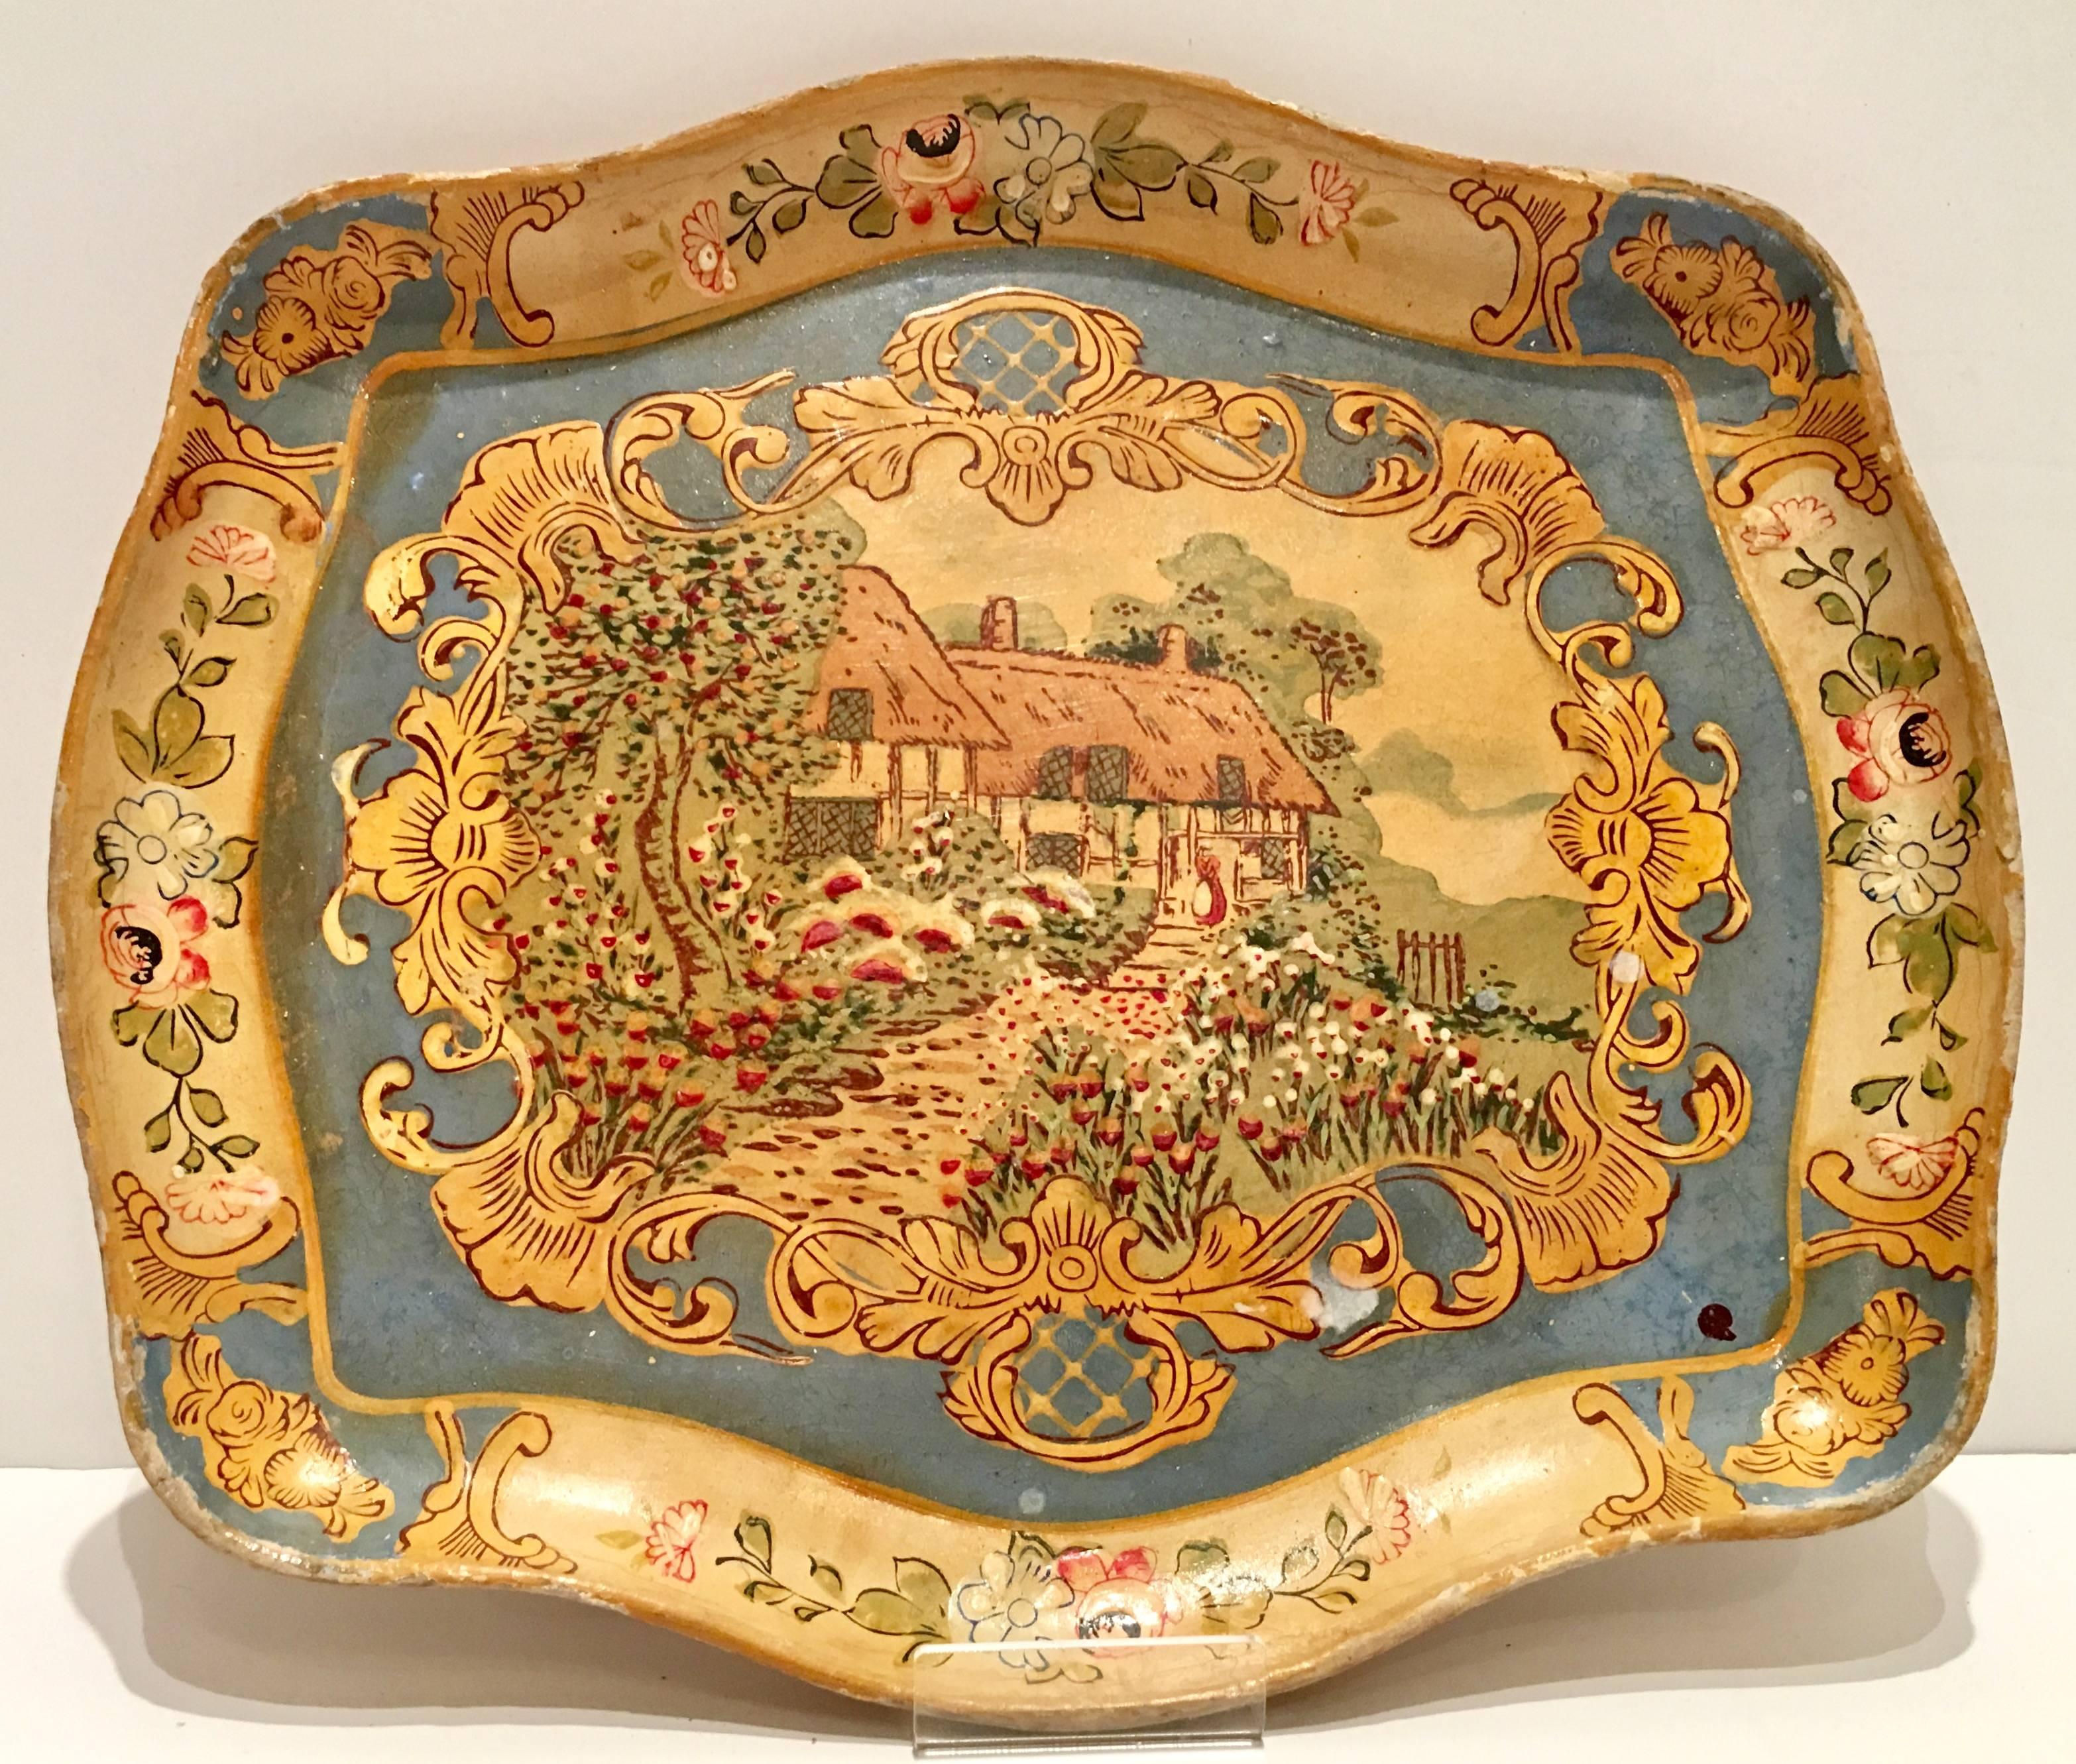 Vintage unique set of three Italian Florentine style papier mâché trays. This collection of three includes one yellow, one red and one blue tray all hand-painted with a gold gilt edge detail and a house in the country motif. Each tray is signed on